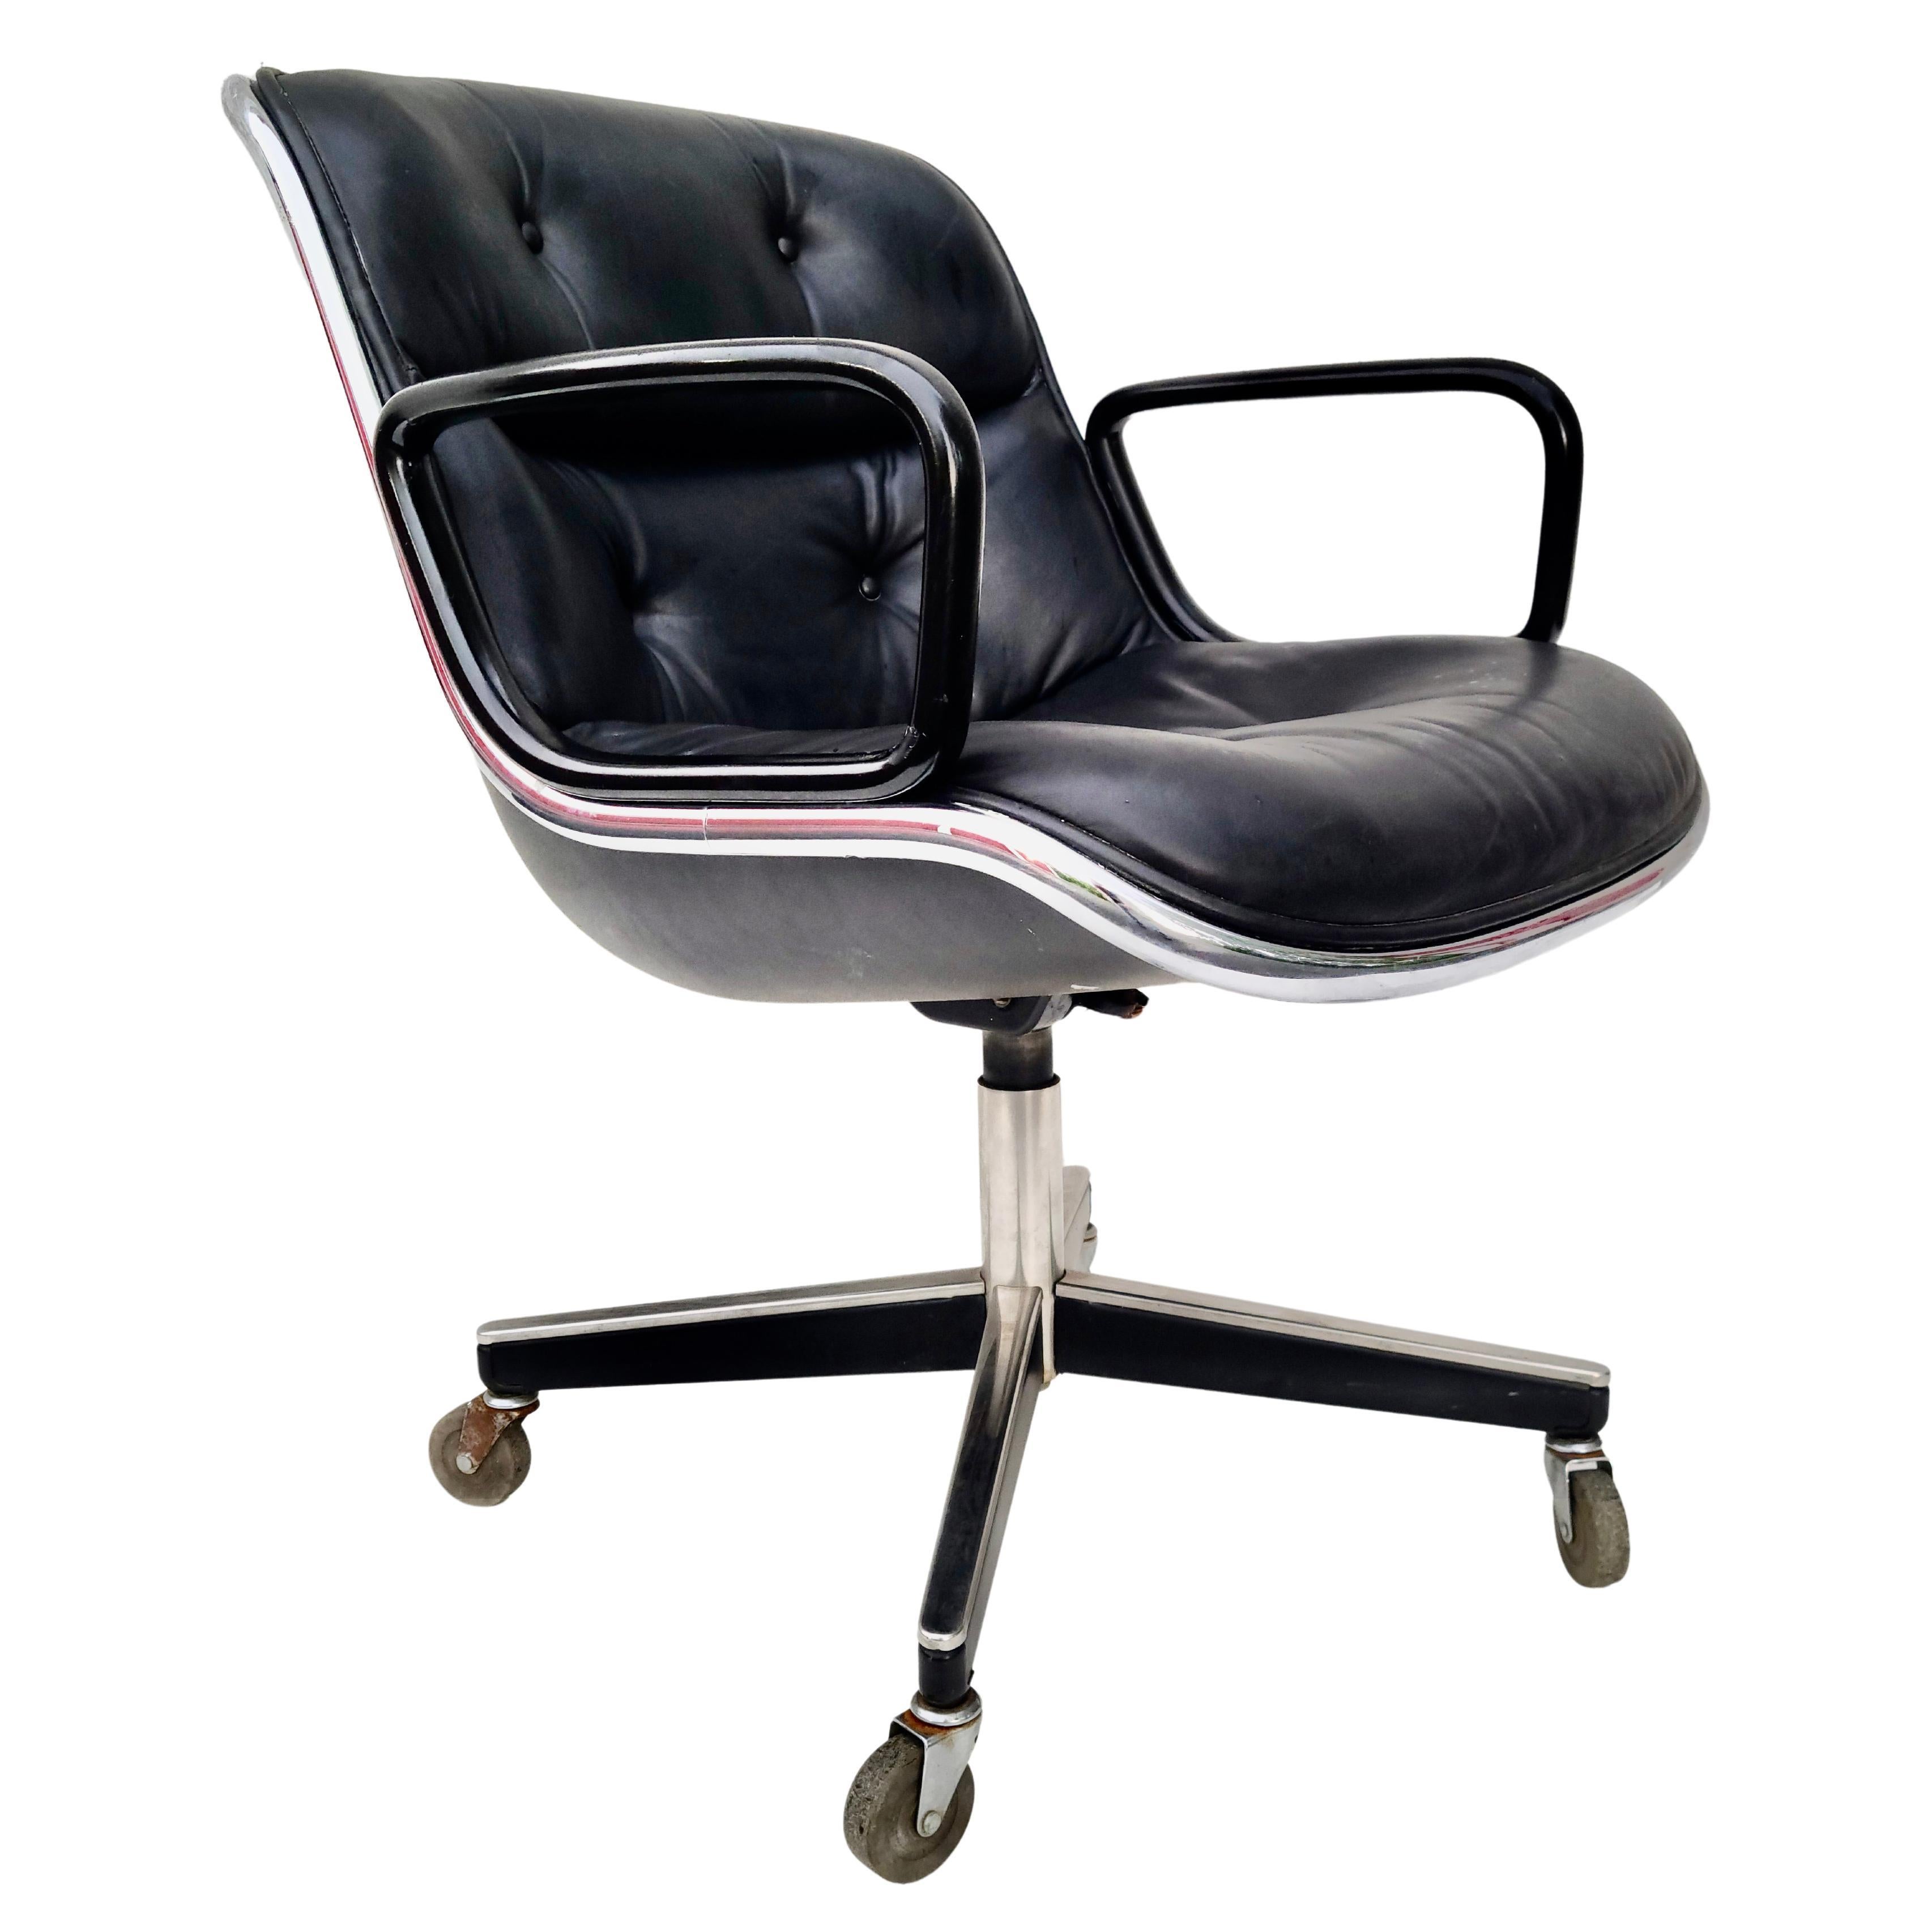 Please feel free to reach out for accurate shipping to your location.

Charles Pollock Rolling Task Chair made by Knoll International.
Black Leather Seating Surface is soft and supple.
Cushion is flexible and holds its form.
Some scratches at back